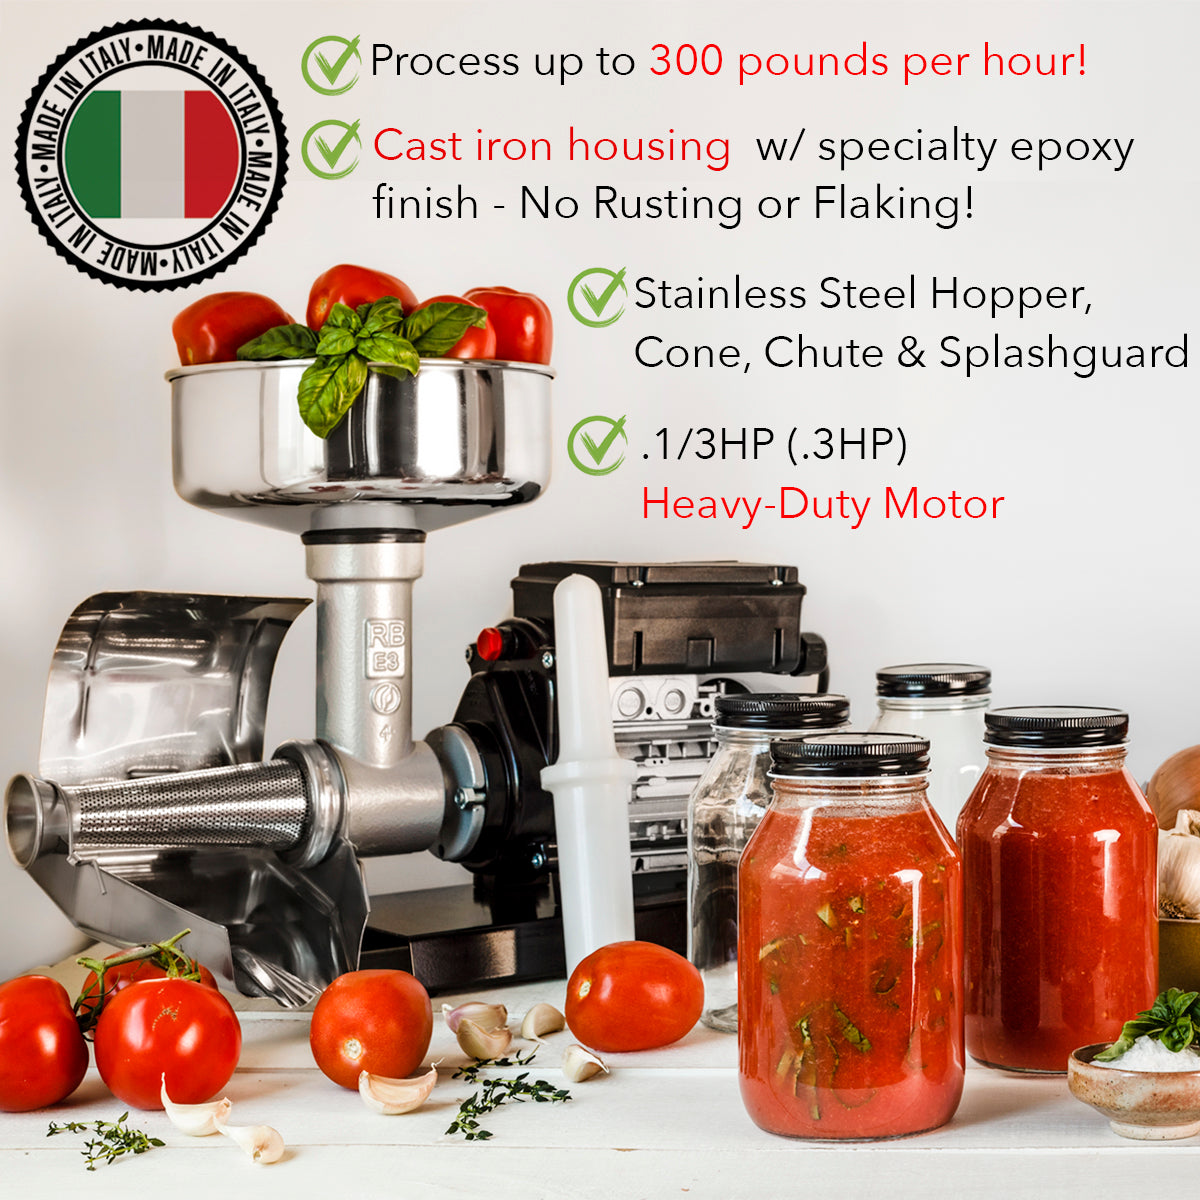 Home Canning, Hand Crank Food-Tomato Strainer, Juicer